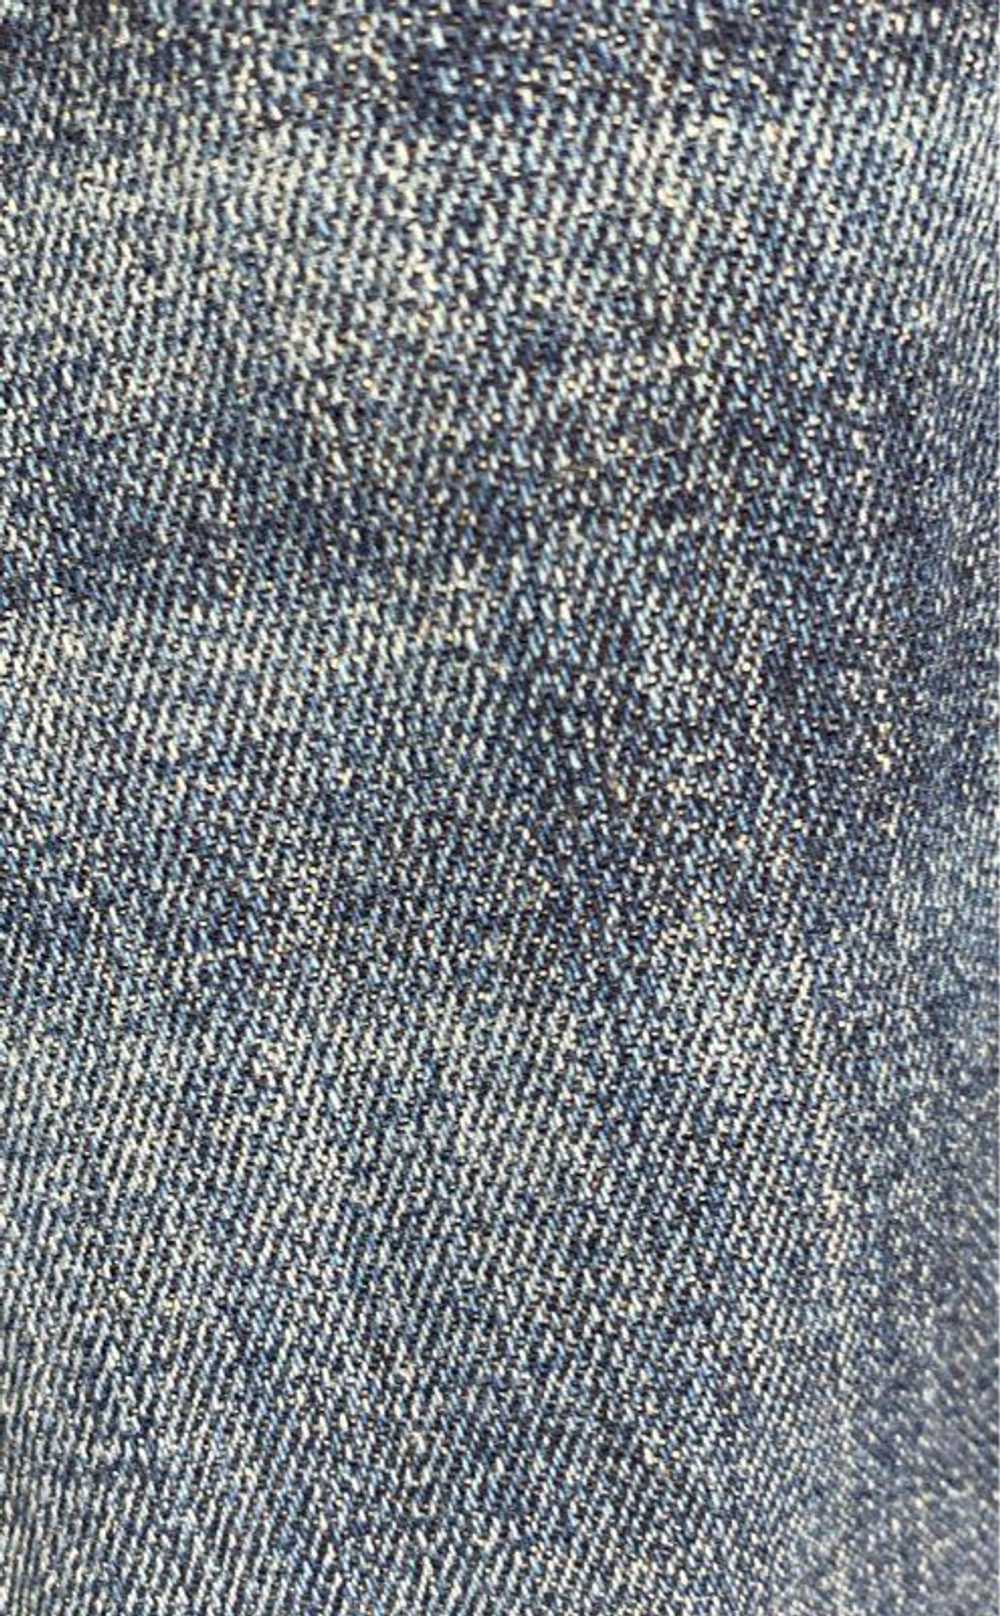 Unbranded Joes Blue Jeans - Size Small - image 4